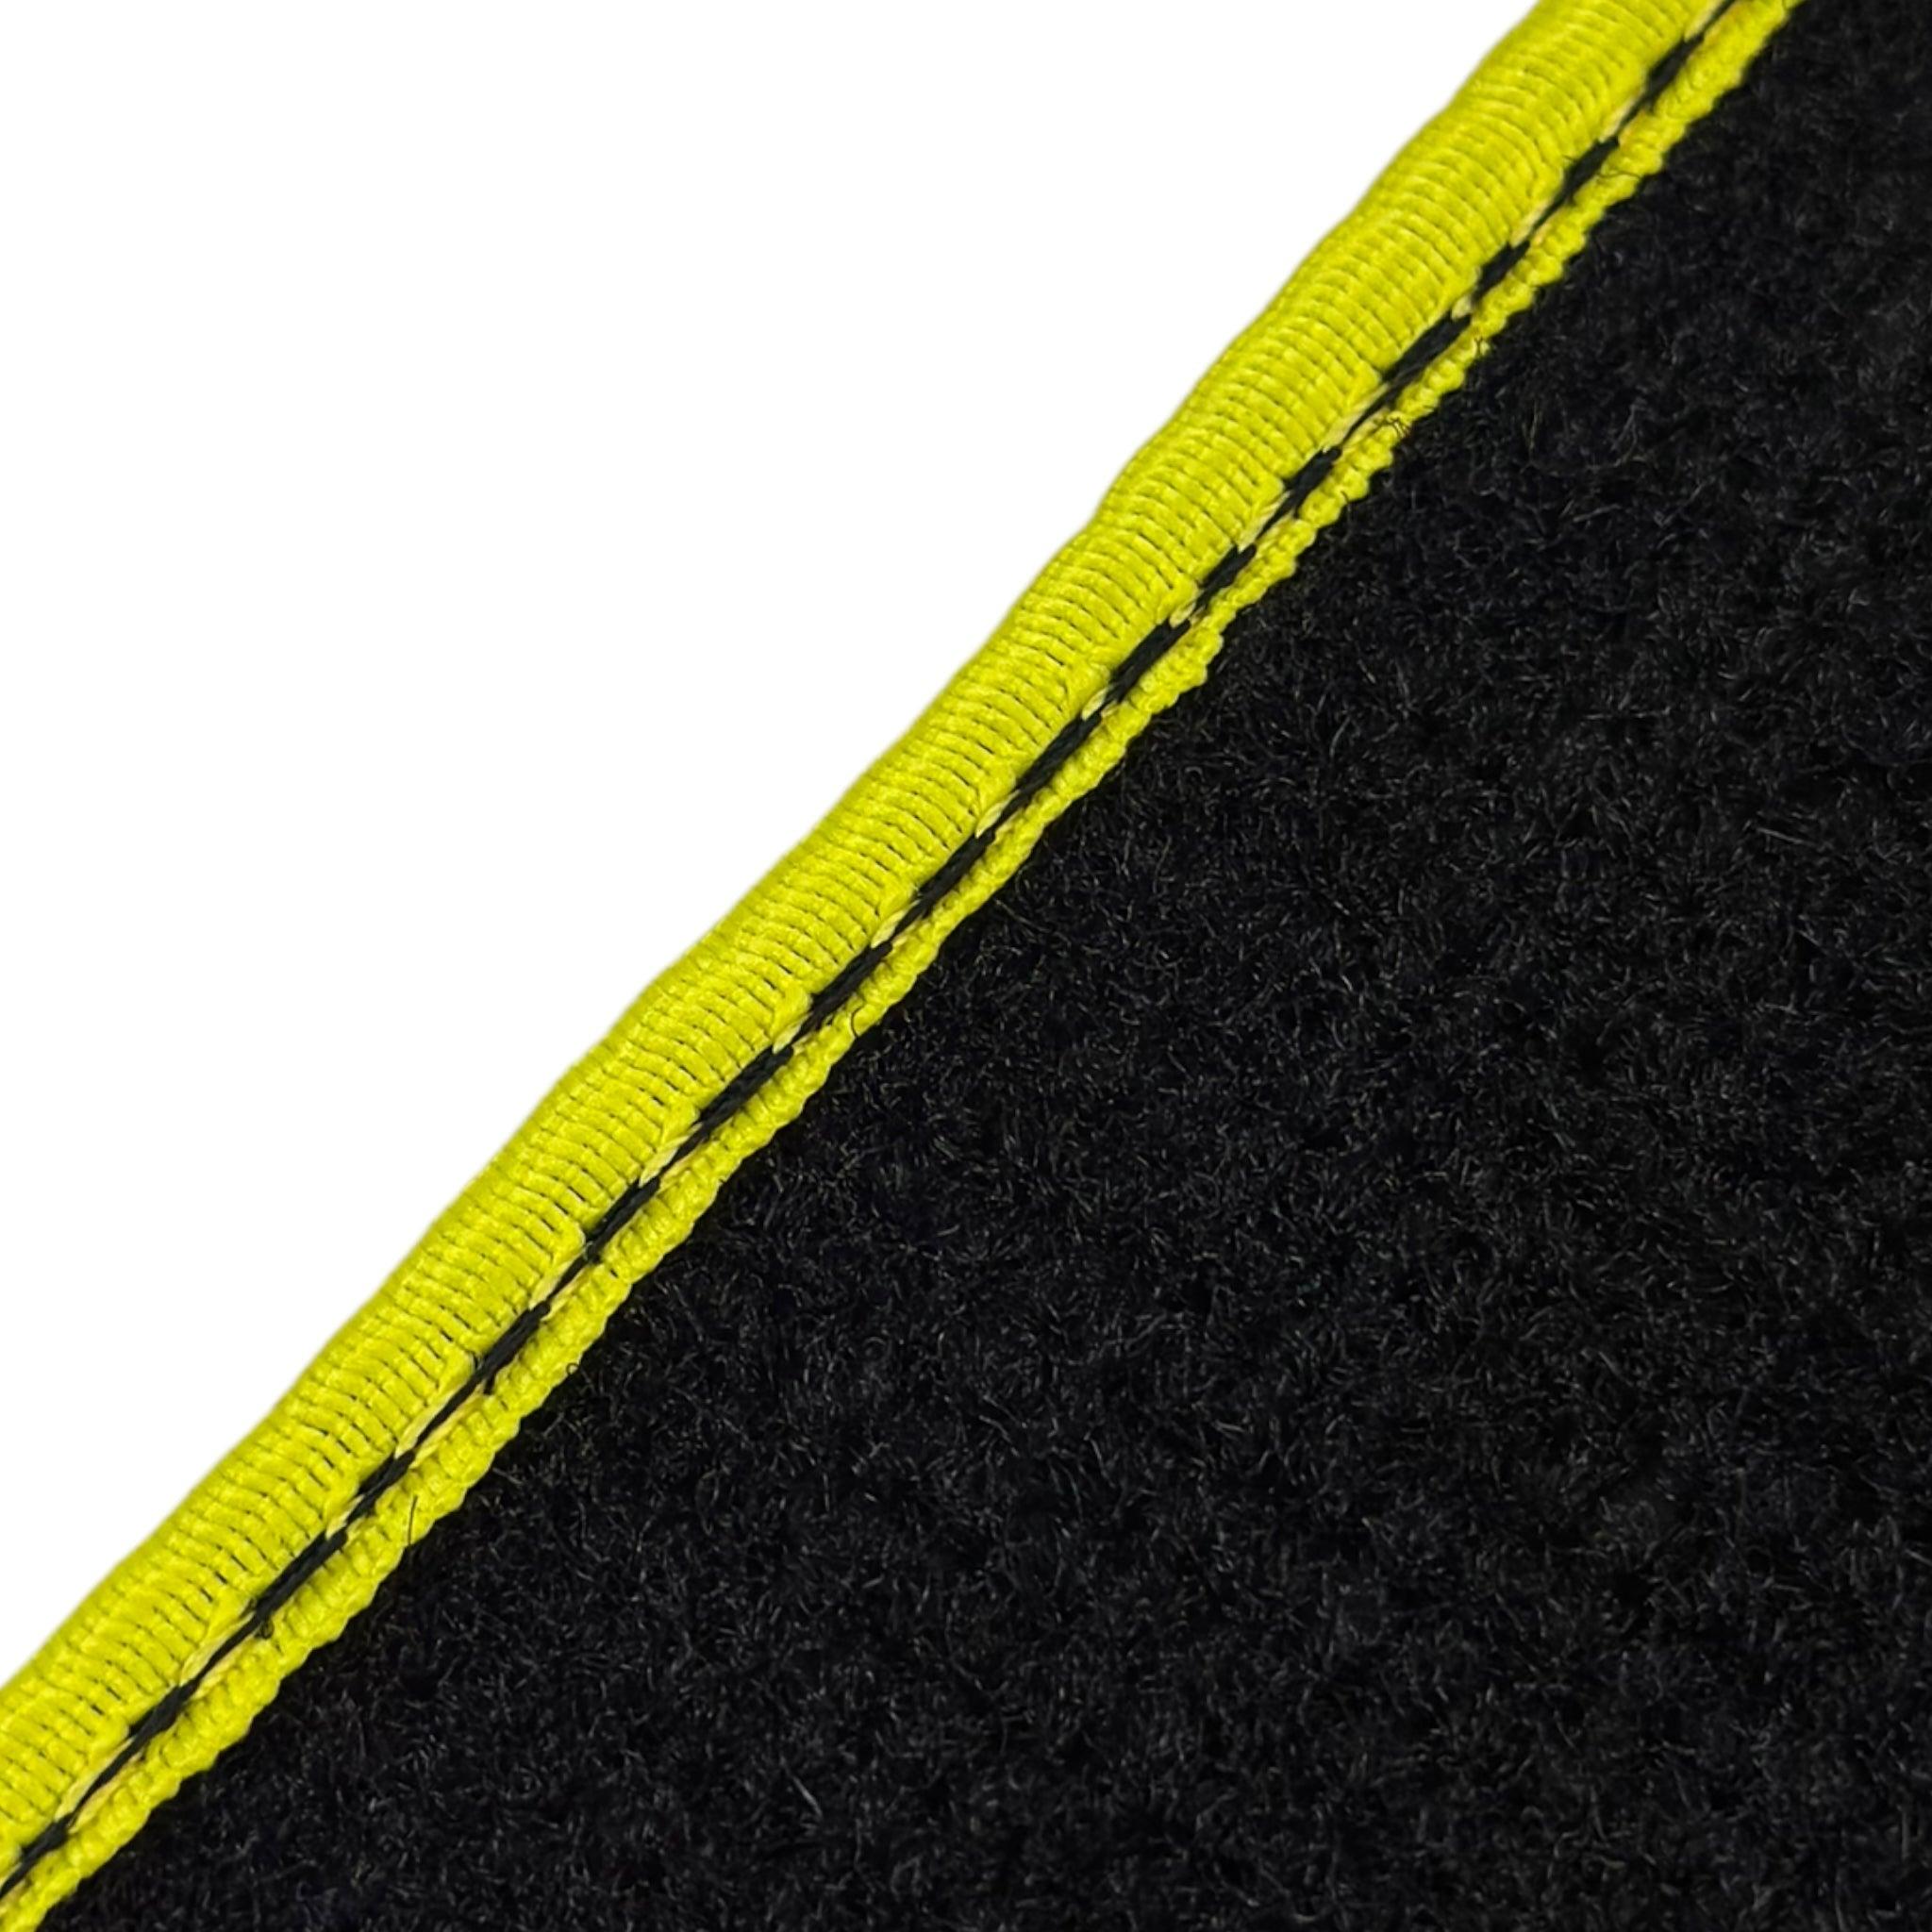 Black Floor Mats For BMW 2 Series F23 Convertible | Fighter Jet Edition | Yellow Trim